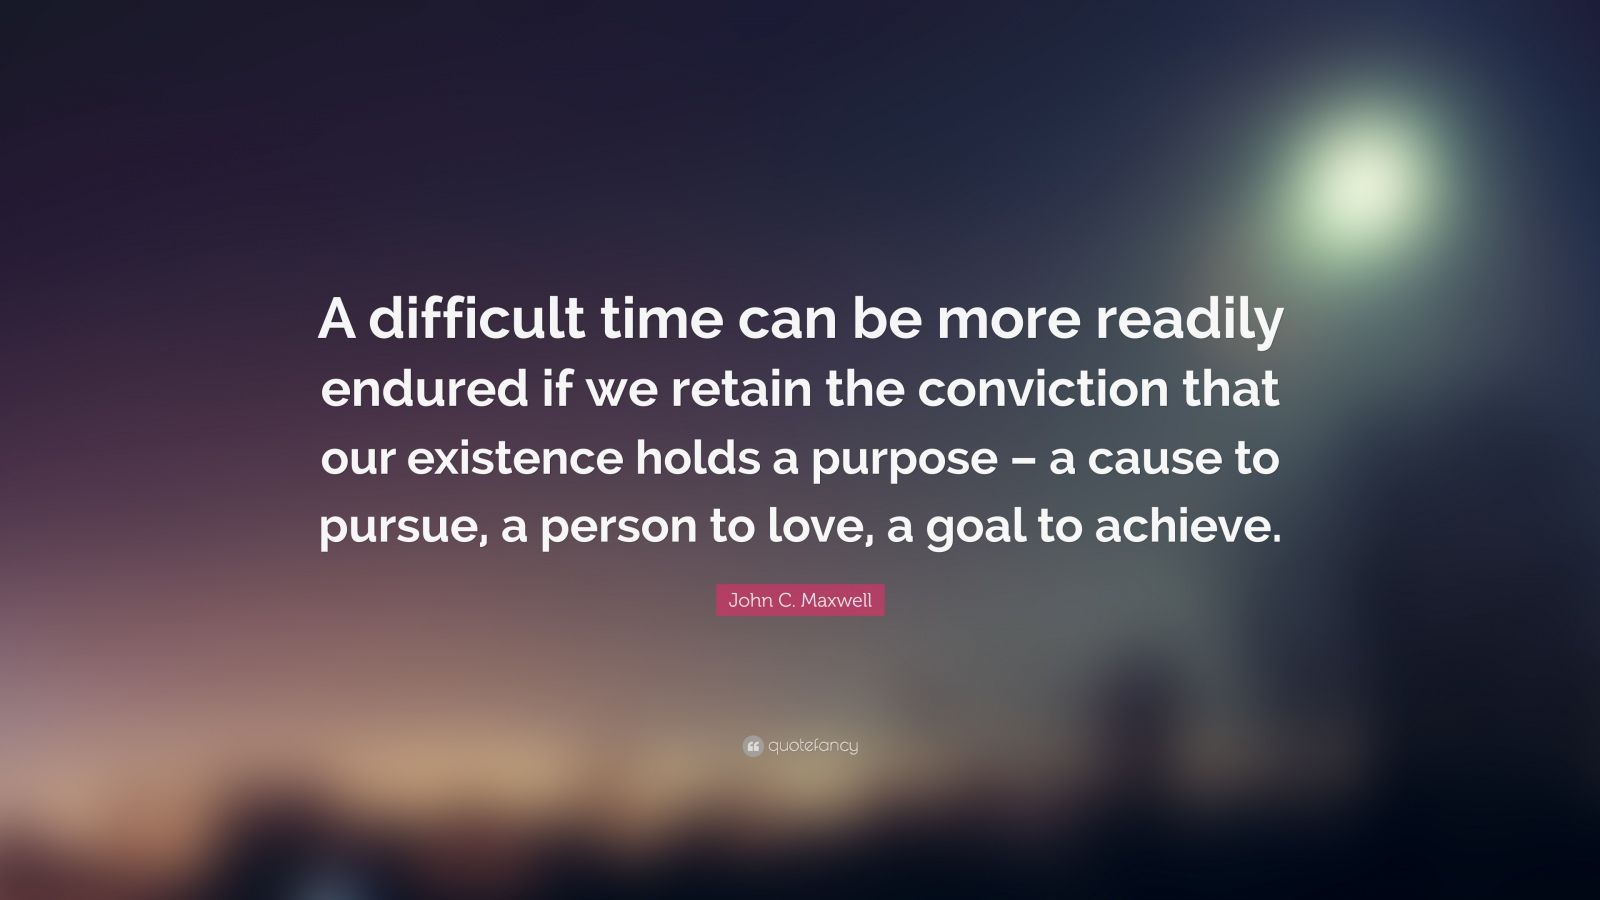 John C Maxwell Quote “a Difficult Time Can Be More Readily Endured If